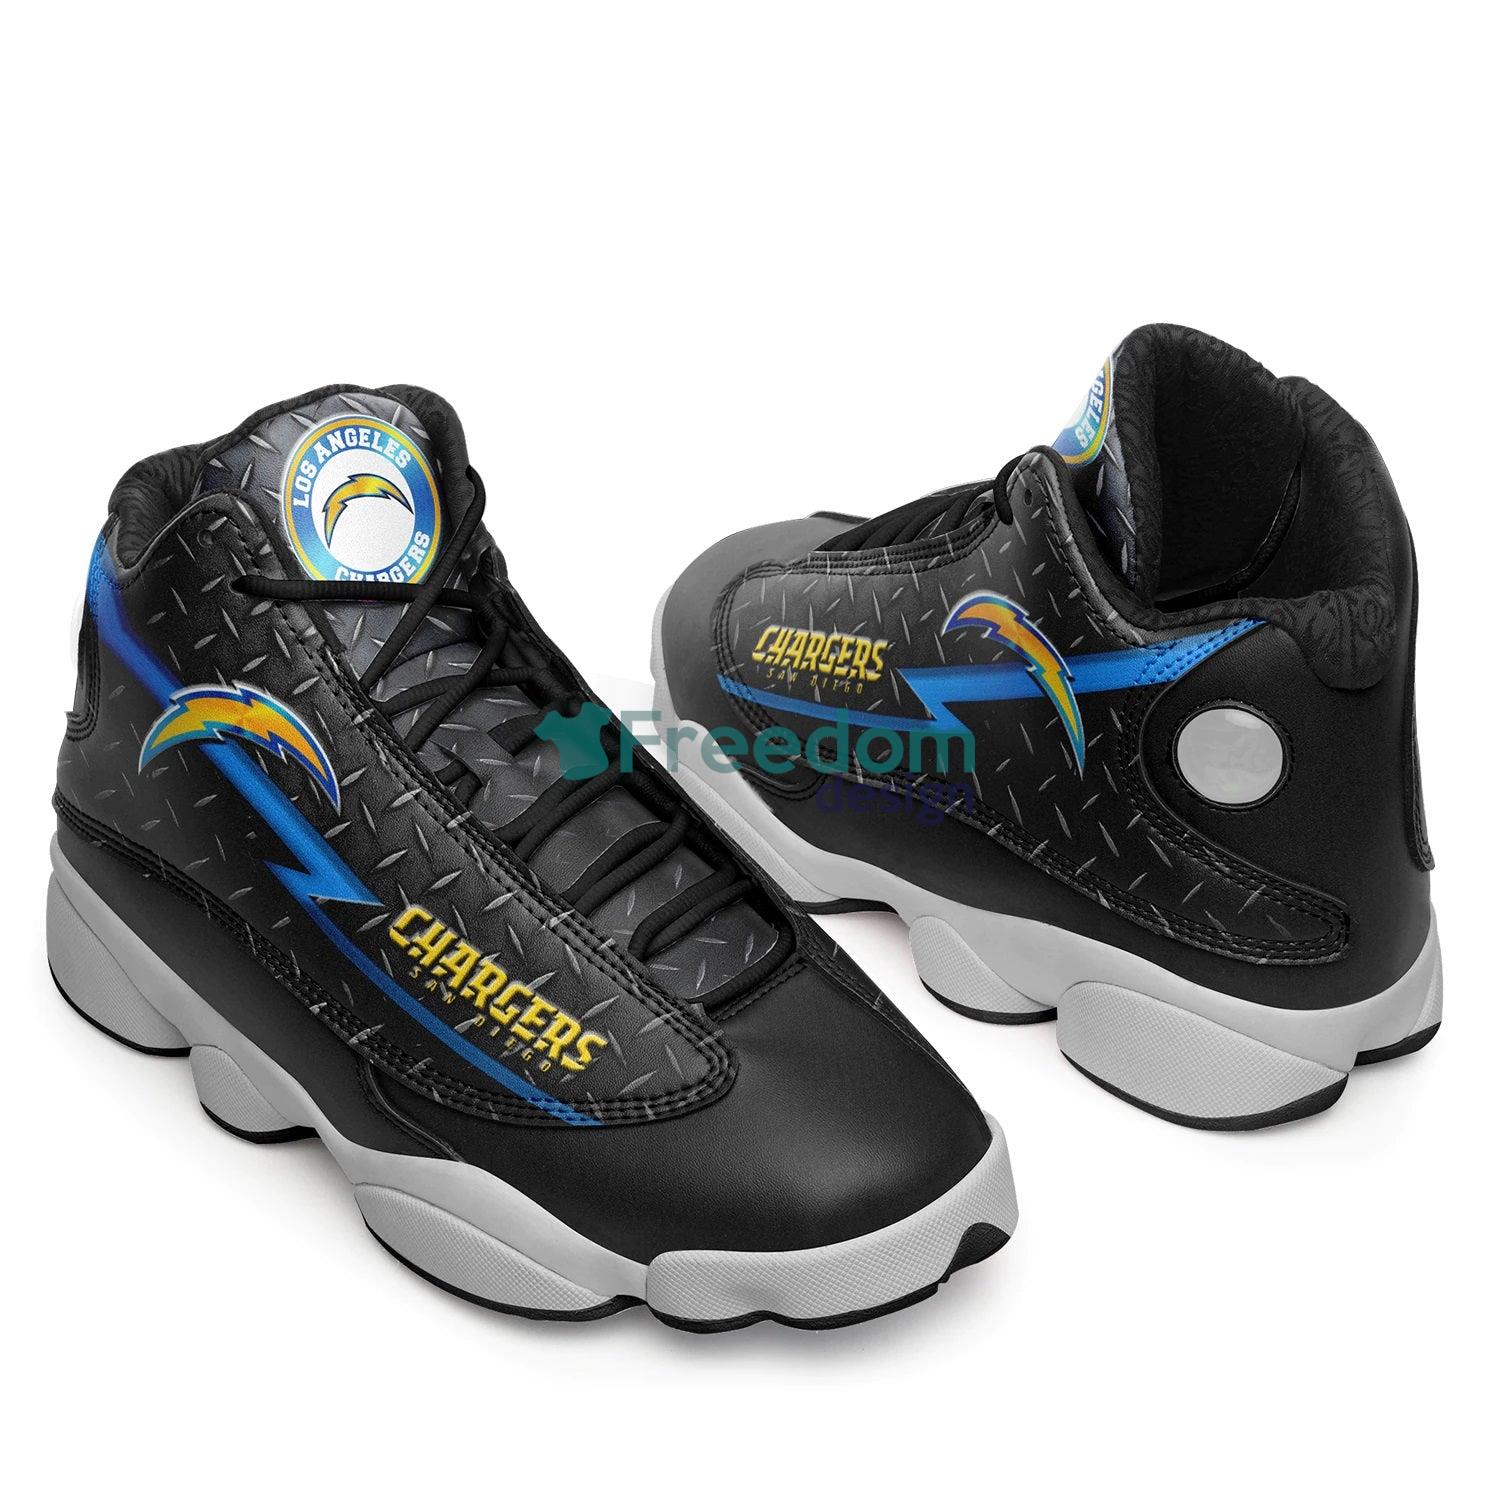 Los Angeles Chargers Team Air Jordan 13 Shoes For Fans